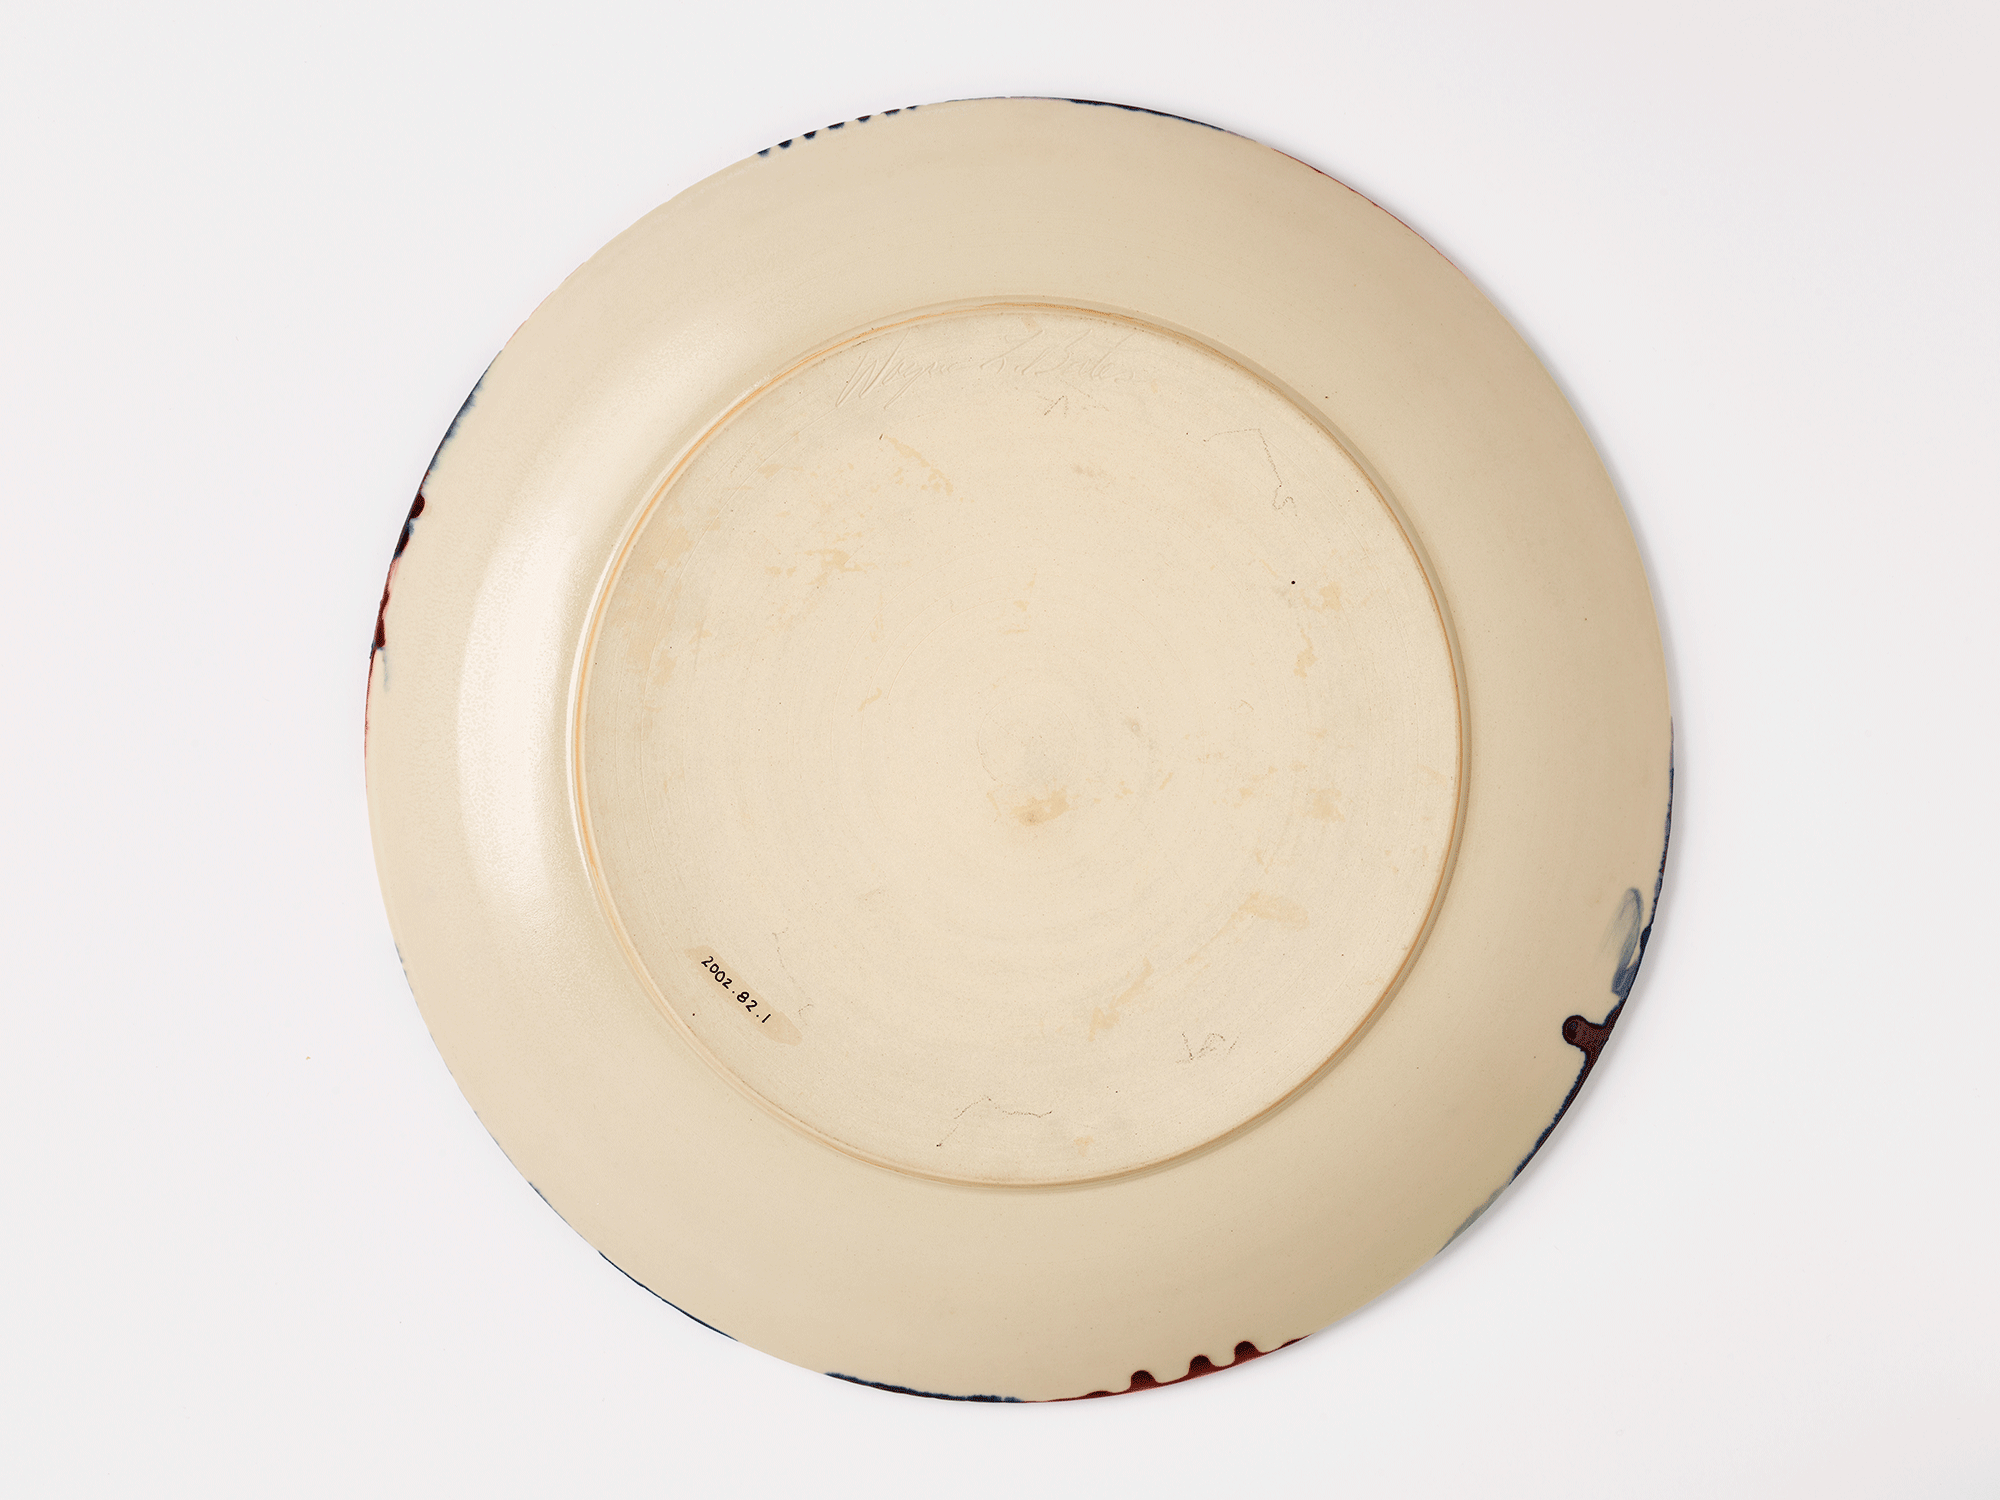 Underside of platter. Cream colored ground with drips of color around the edge. Accession number is visible.